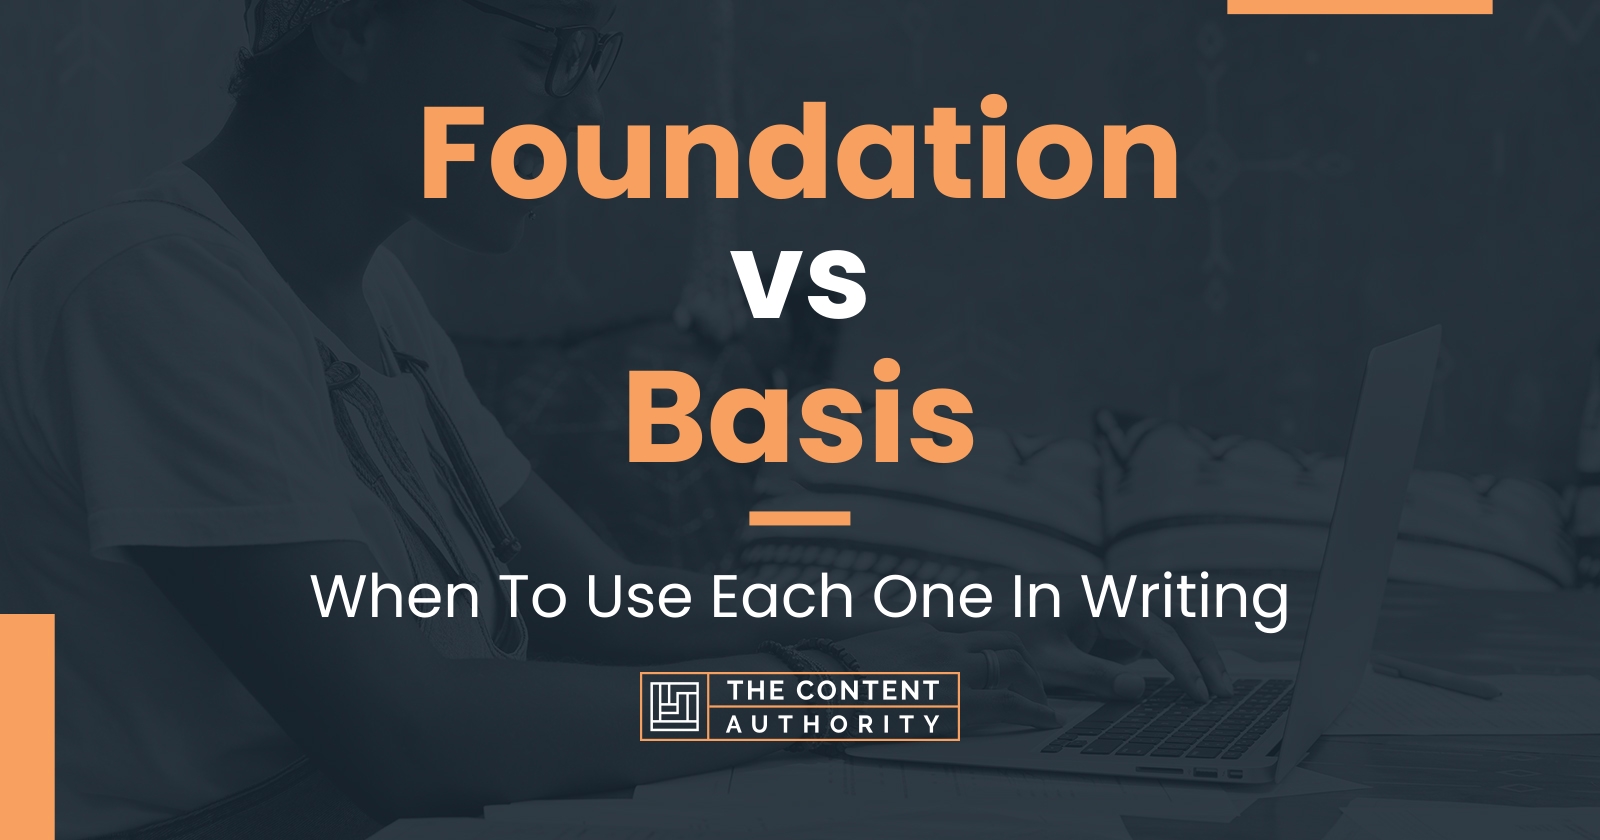 Foundation vs Basis: When To Use Each One In Writing